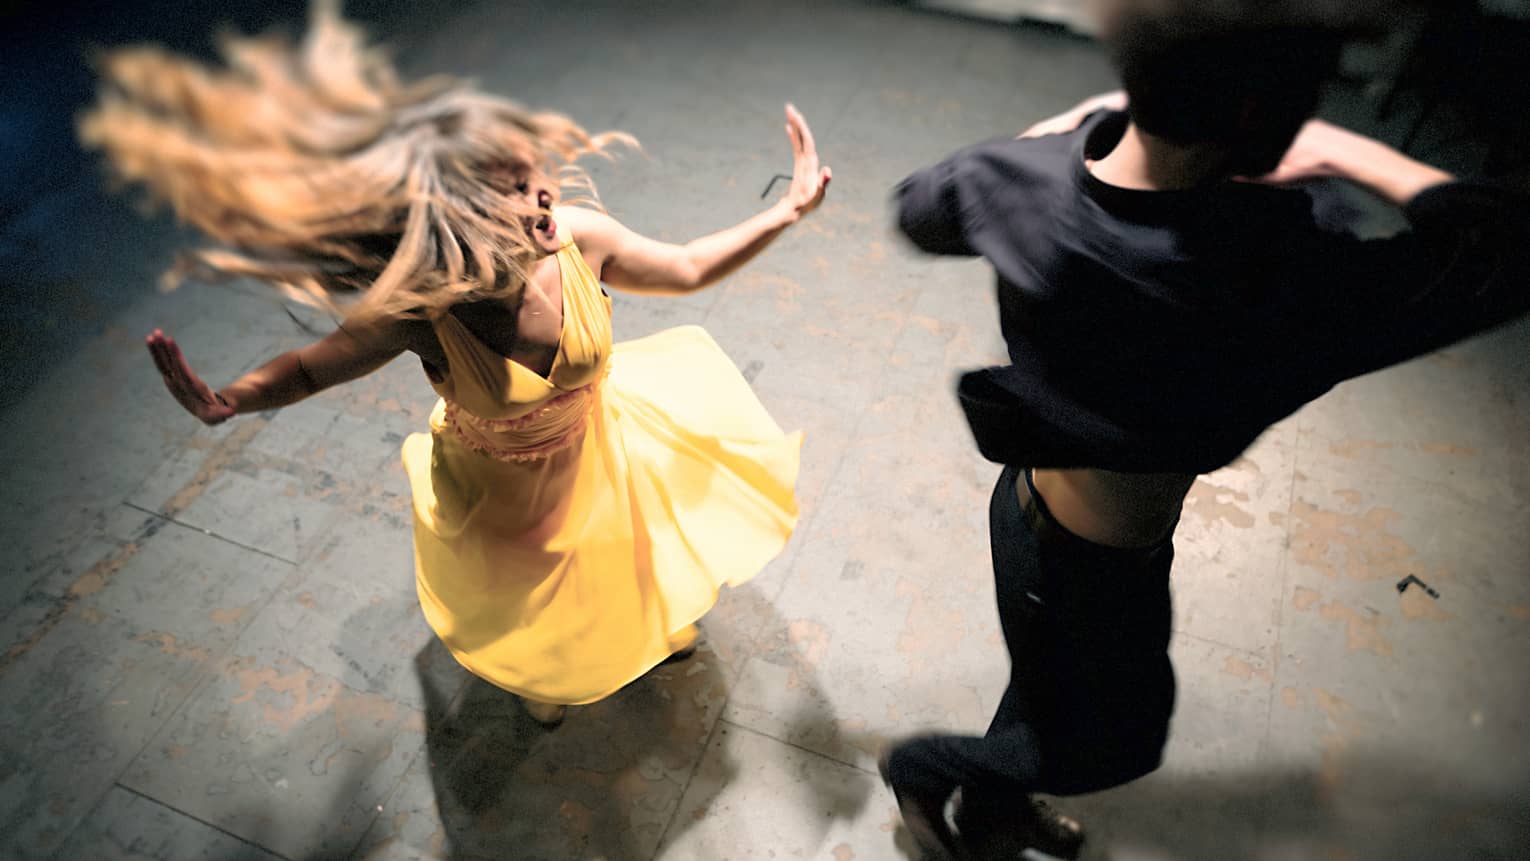 Woman in a yellow dress is spinning on the dance floor as a man wearing all black dances next to her